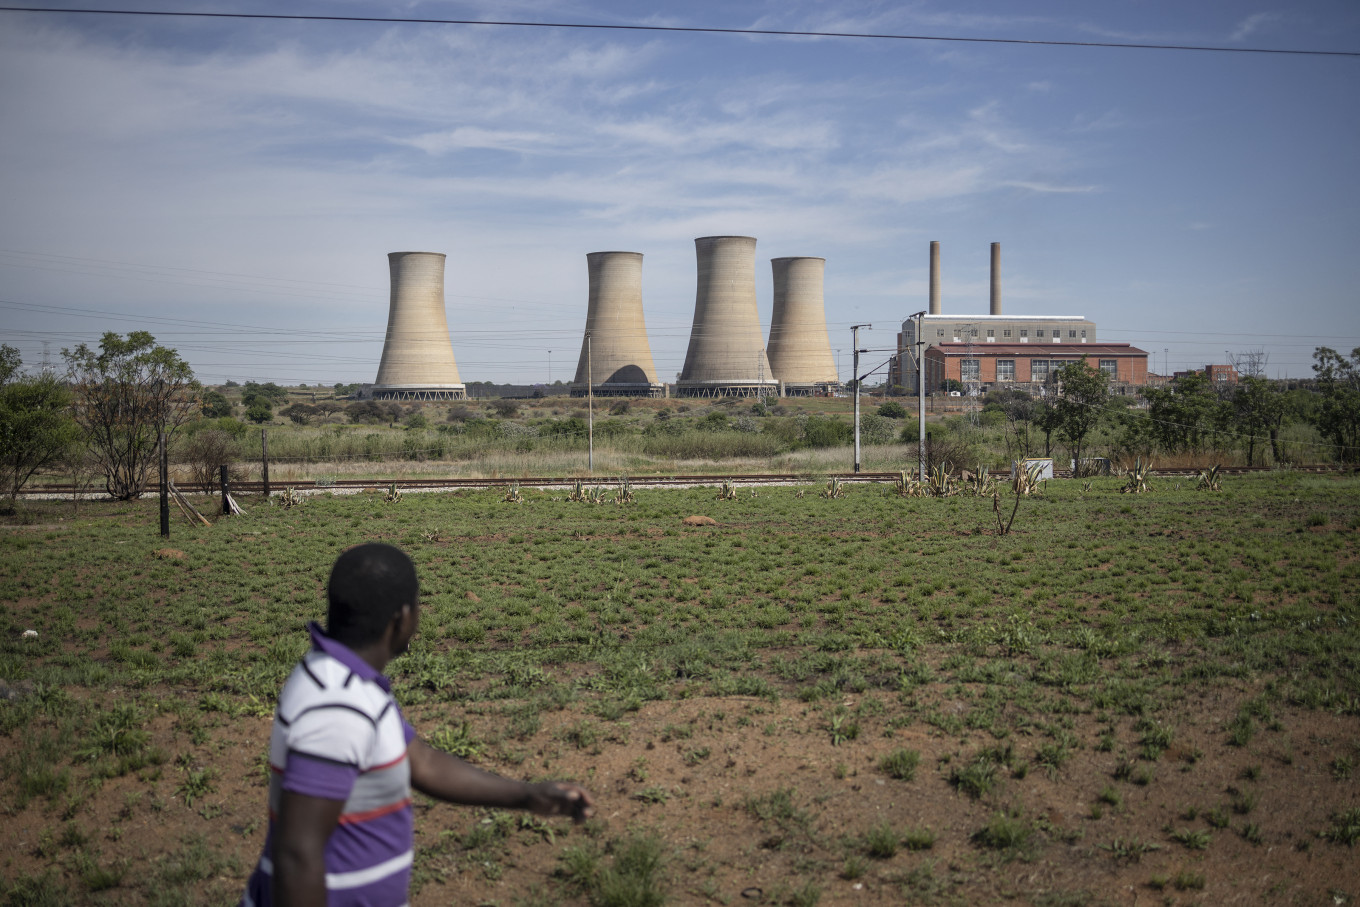 South Africa will get $8.5 billion from rich countries to phase out coal. www.theexchange.africa